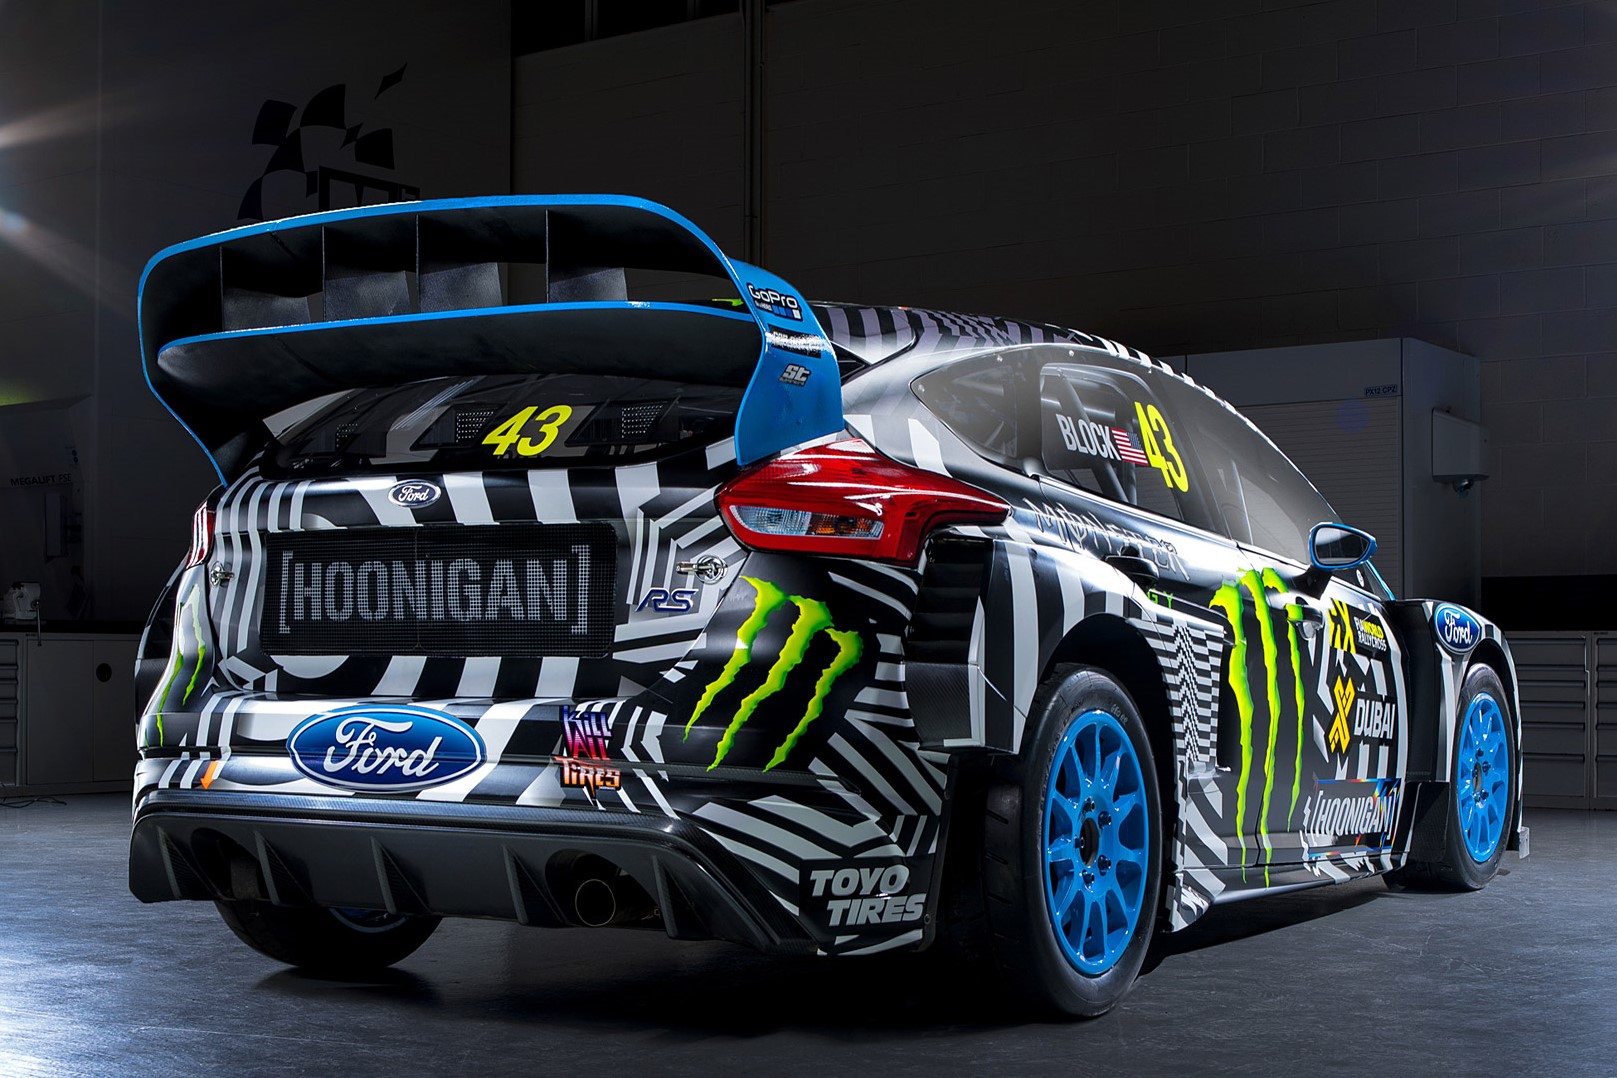 Ken Block Ford Focus bought by Grove family 